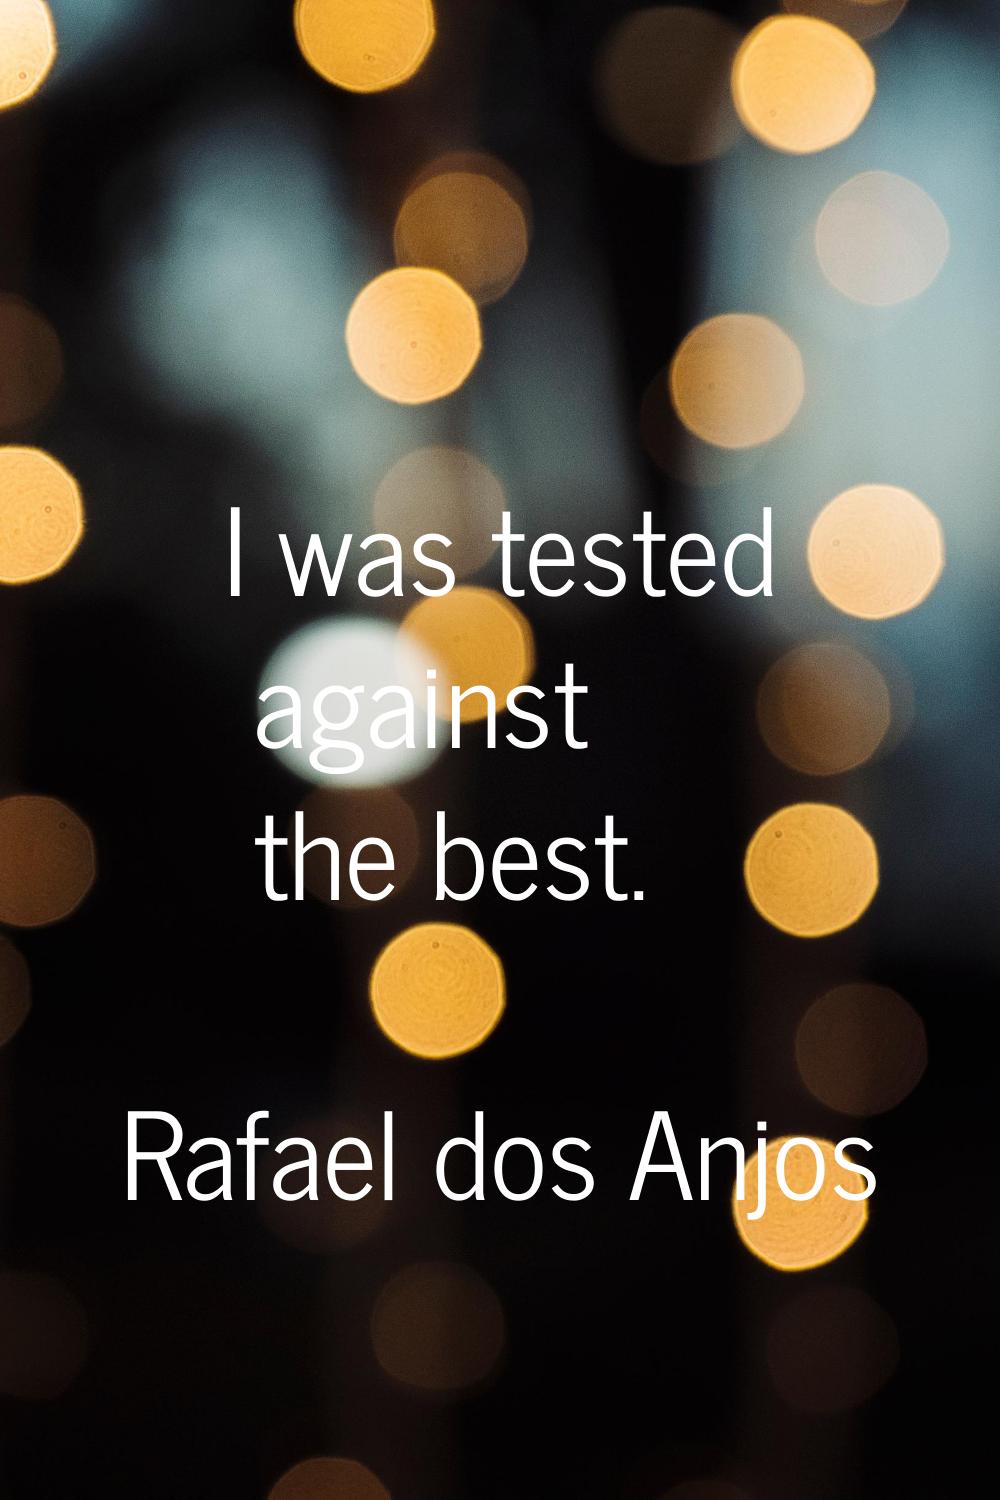 I was tested against the best.